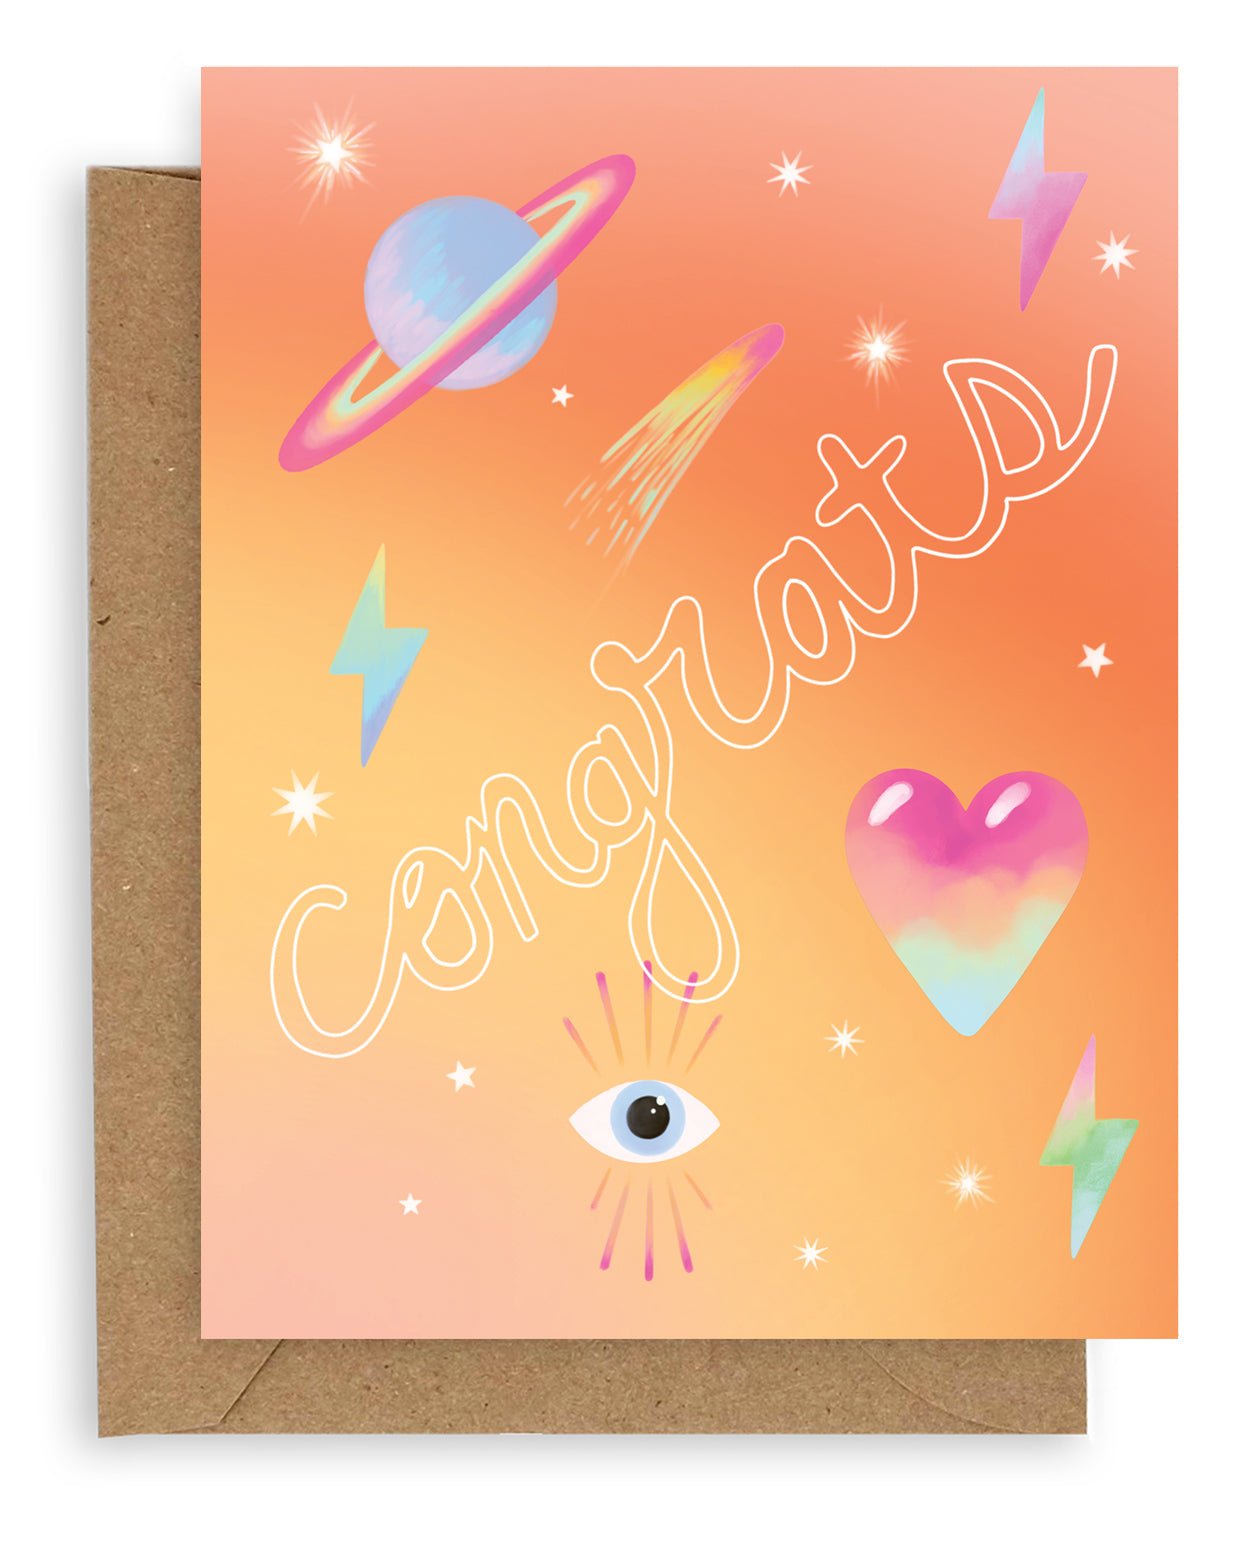 Greeting card with the word &quot;Congrats&quot; across the front in white hollow font with neon icons against an ombre orange background. Shown with brown kraft paper envelope.